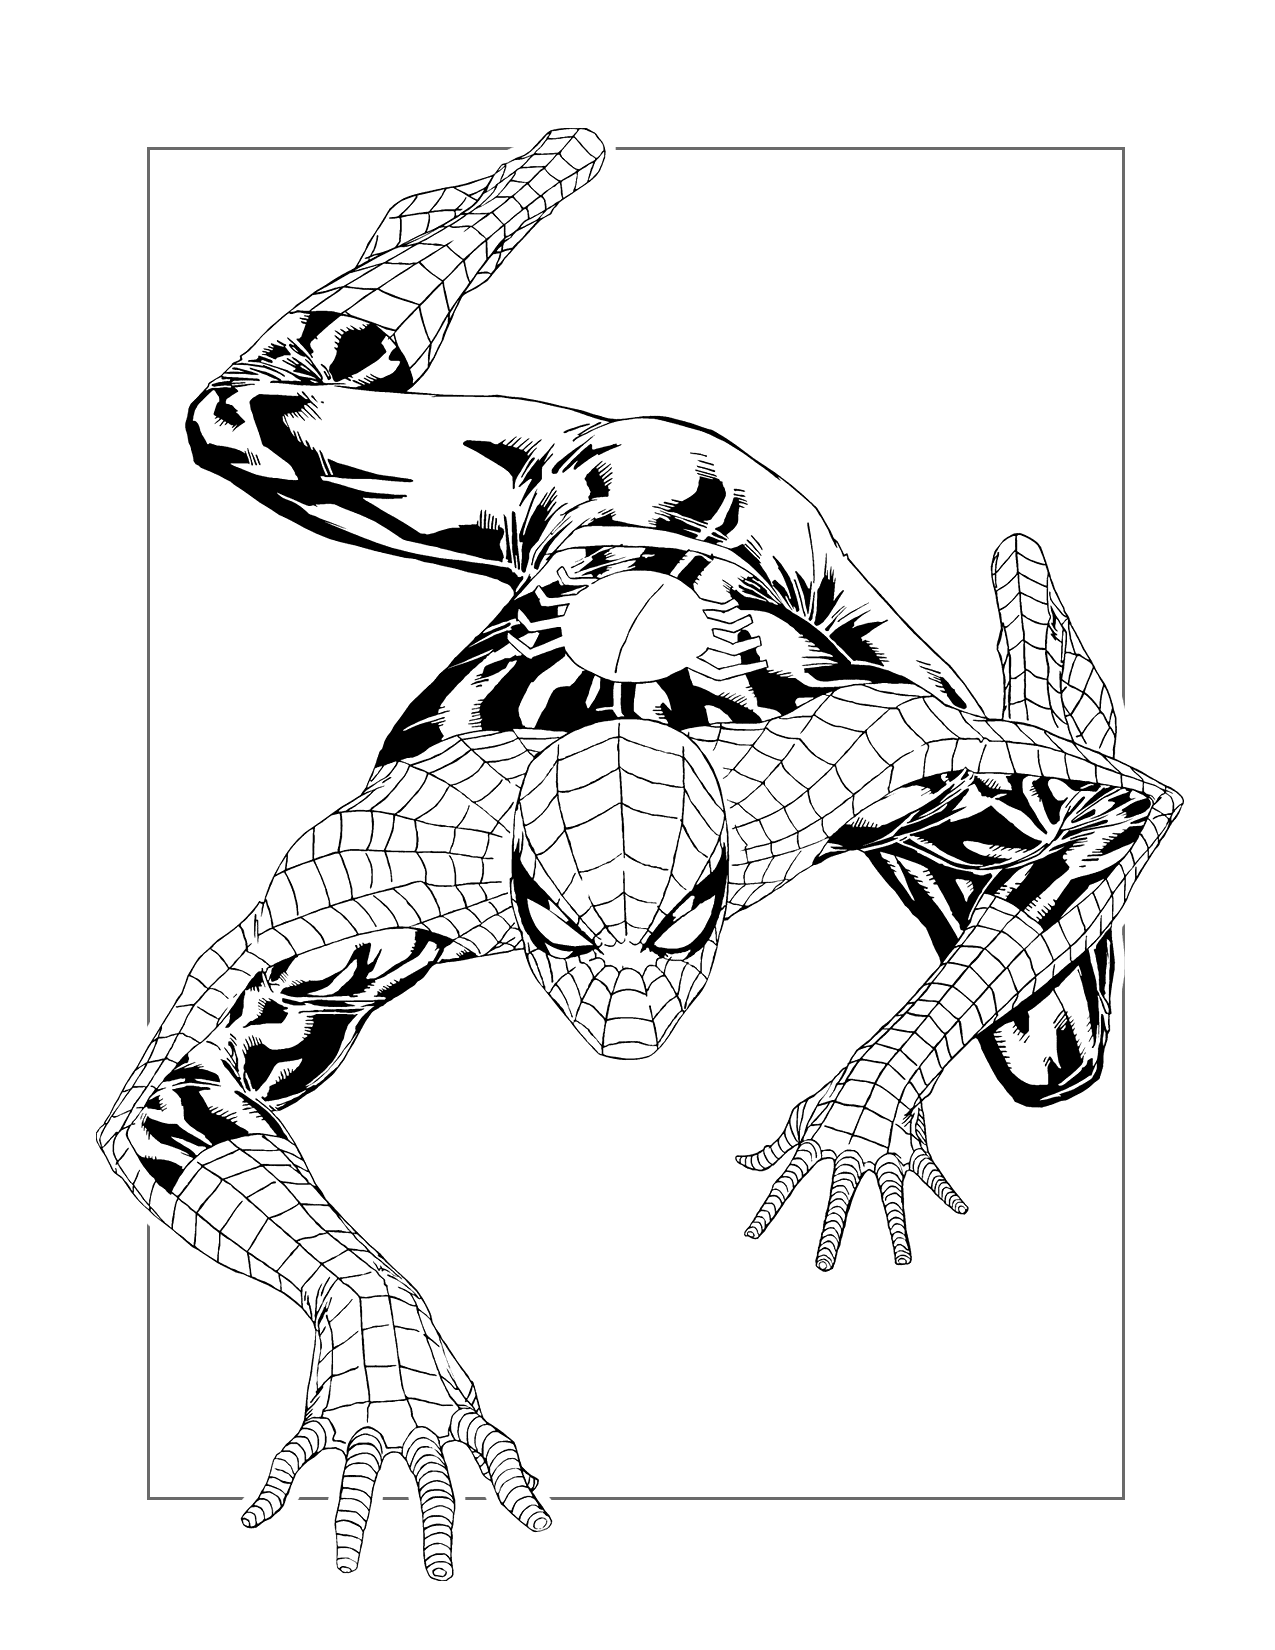 Spiderman Crawling Coloring Page